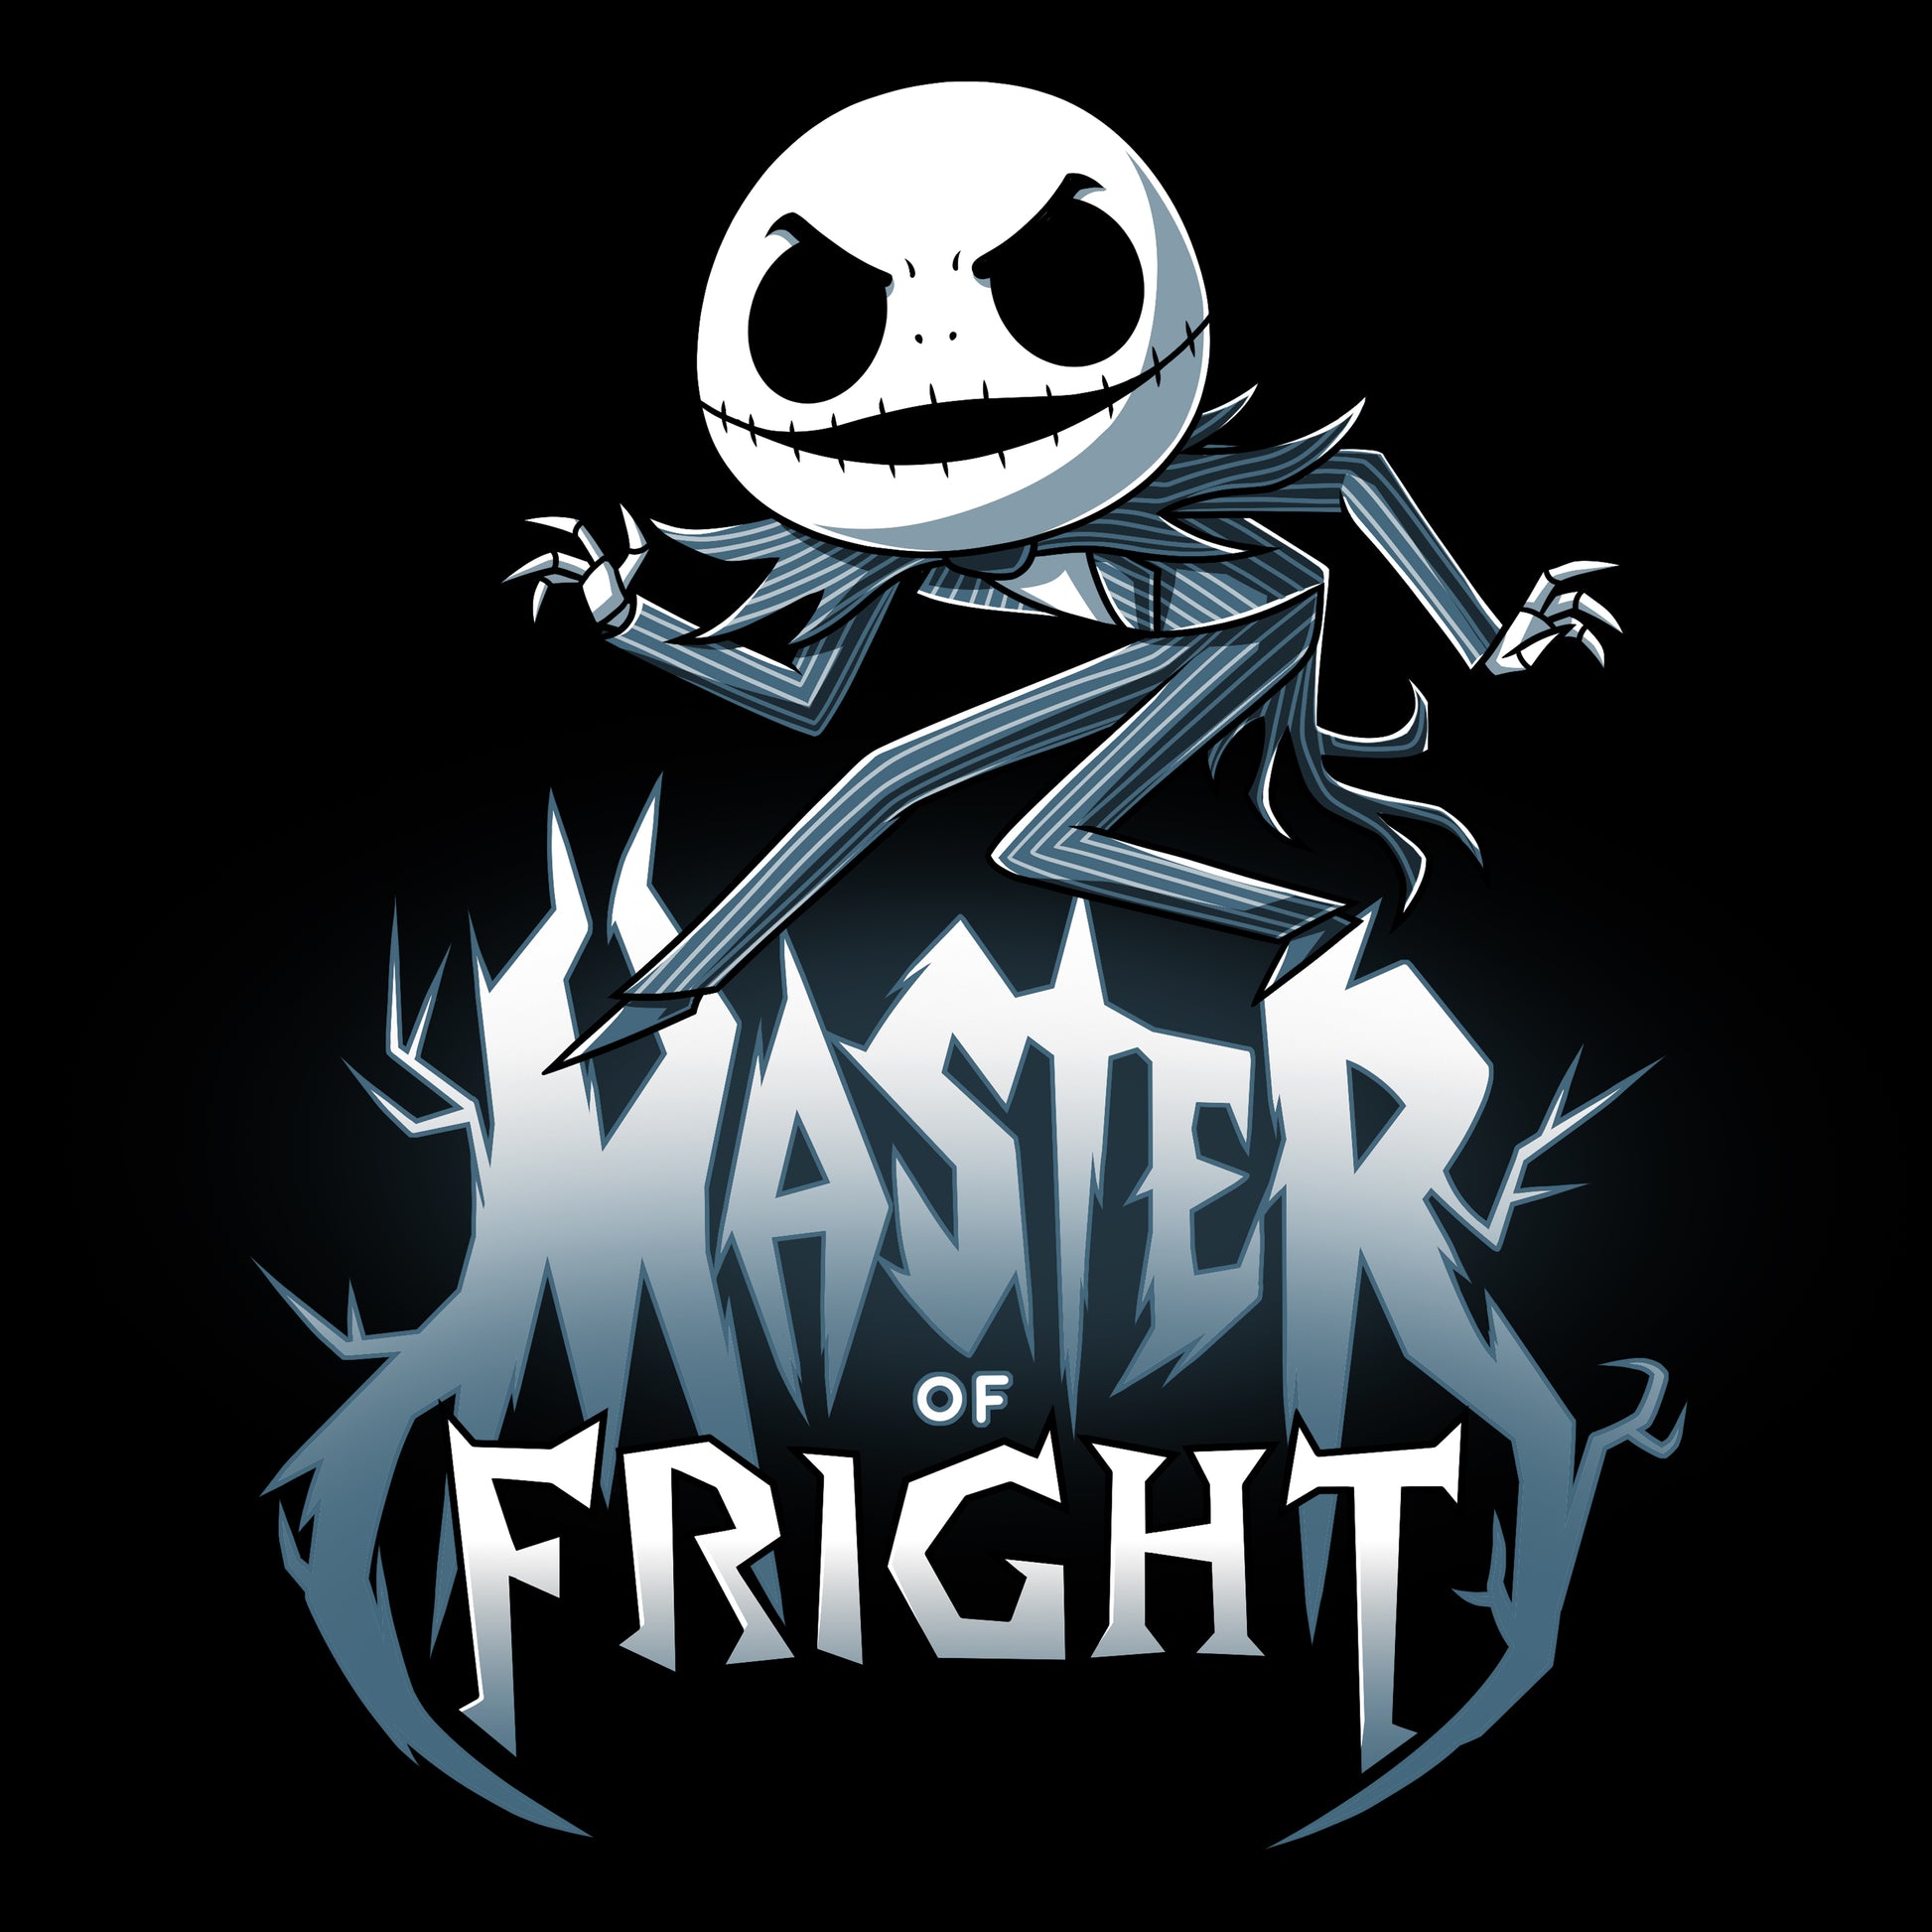 The Nightmare Before Christmas logo for Master of Fright, Jack Skellington, on a T-shirt.